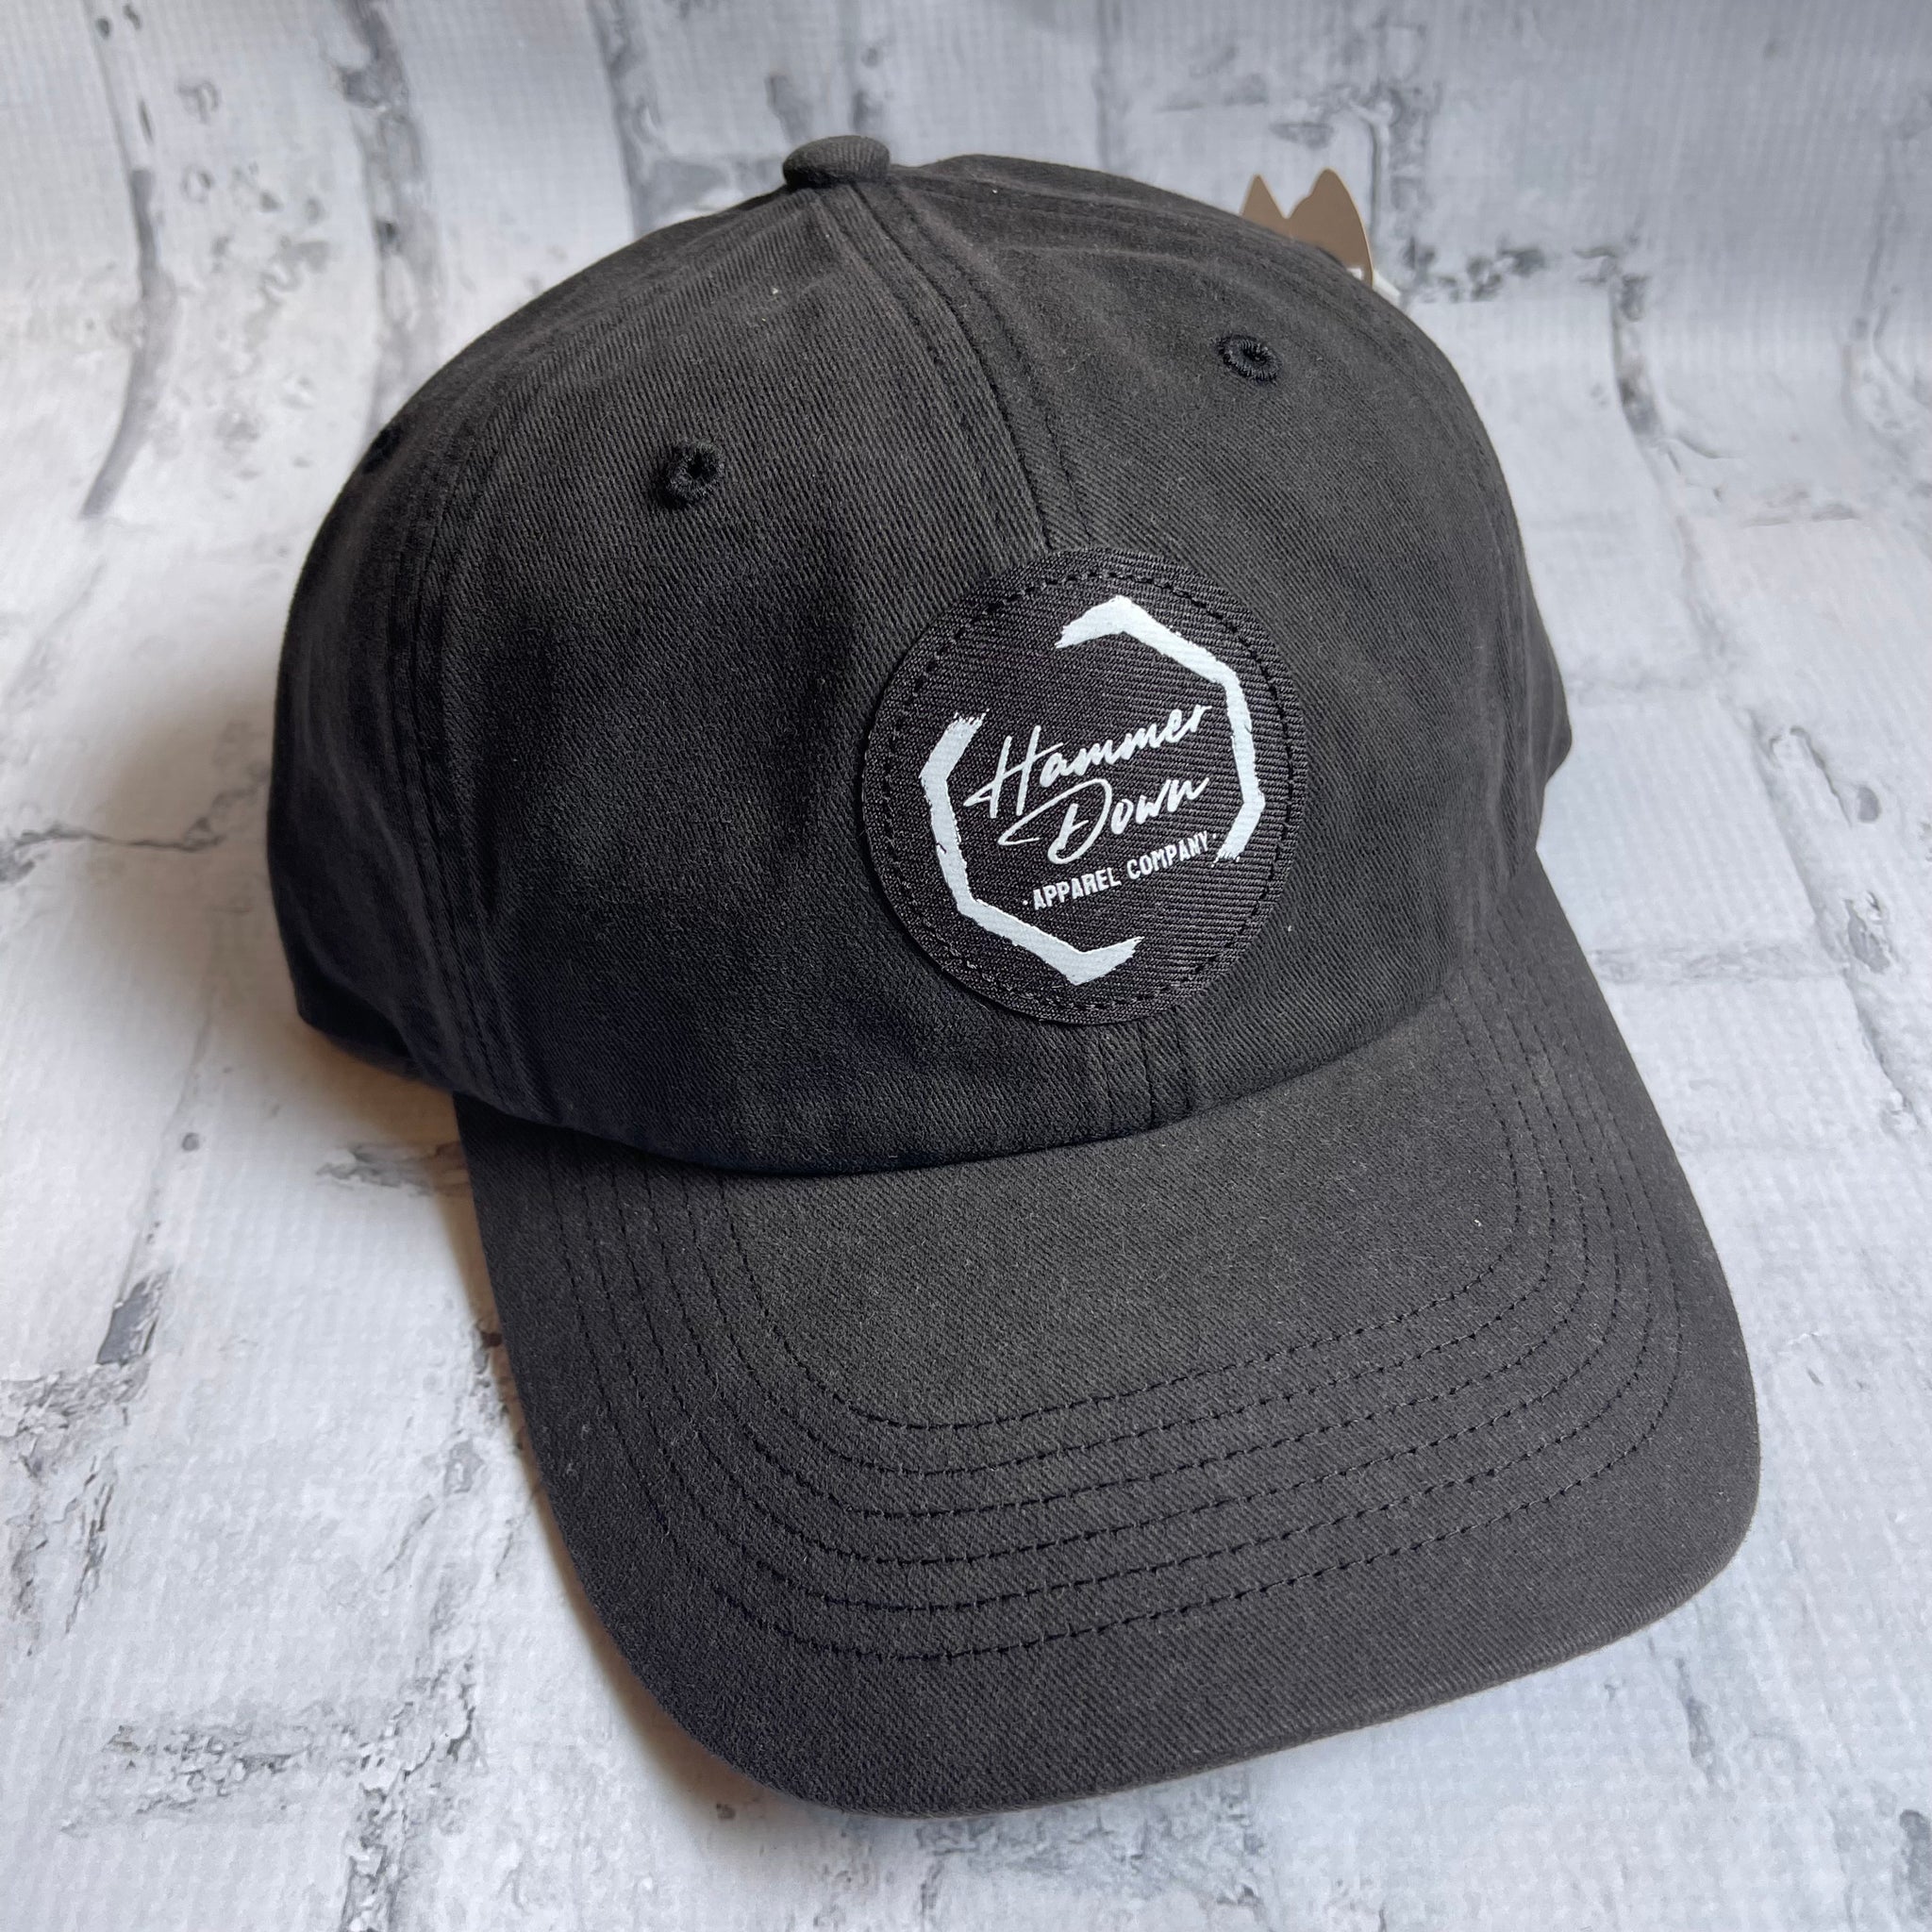 Hammer Down "Paint Swatch" Hat - Black with Leather Patch - Southern Charm "Shop The Charm"